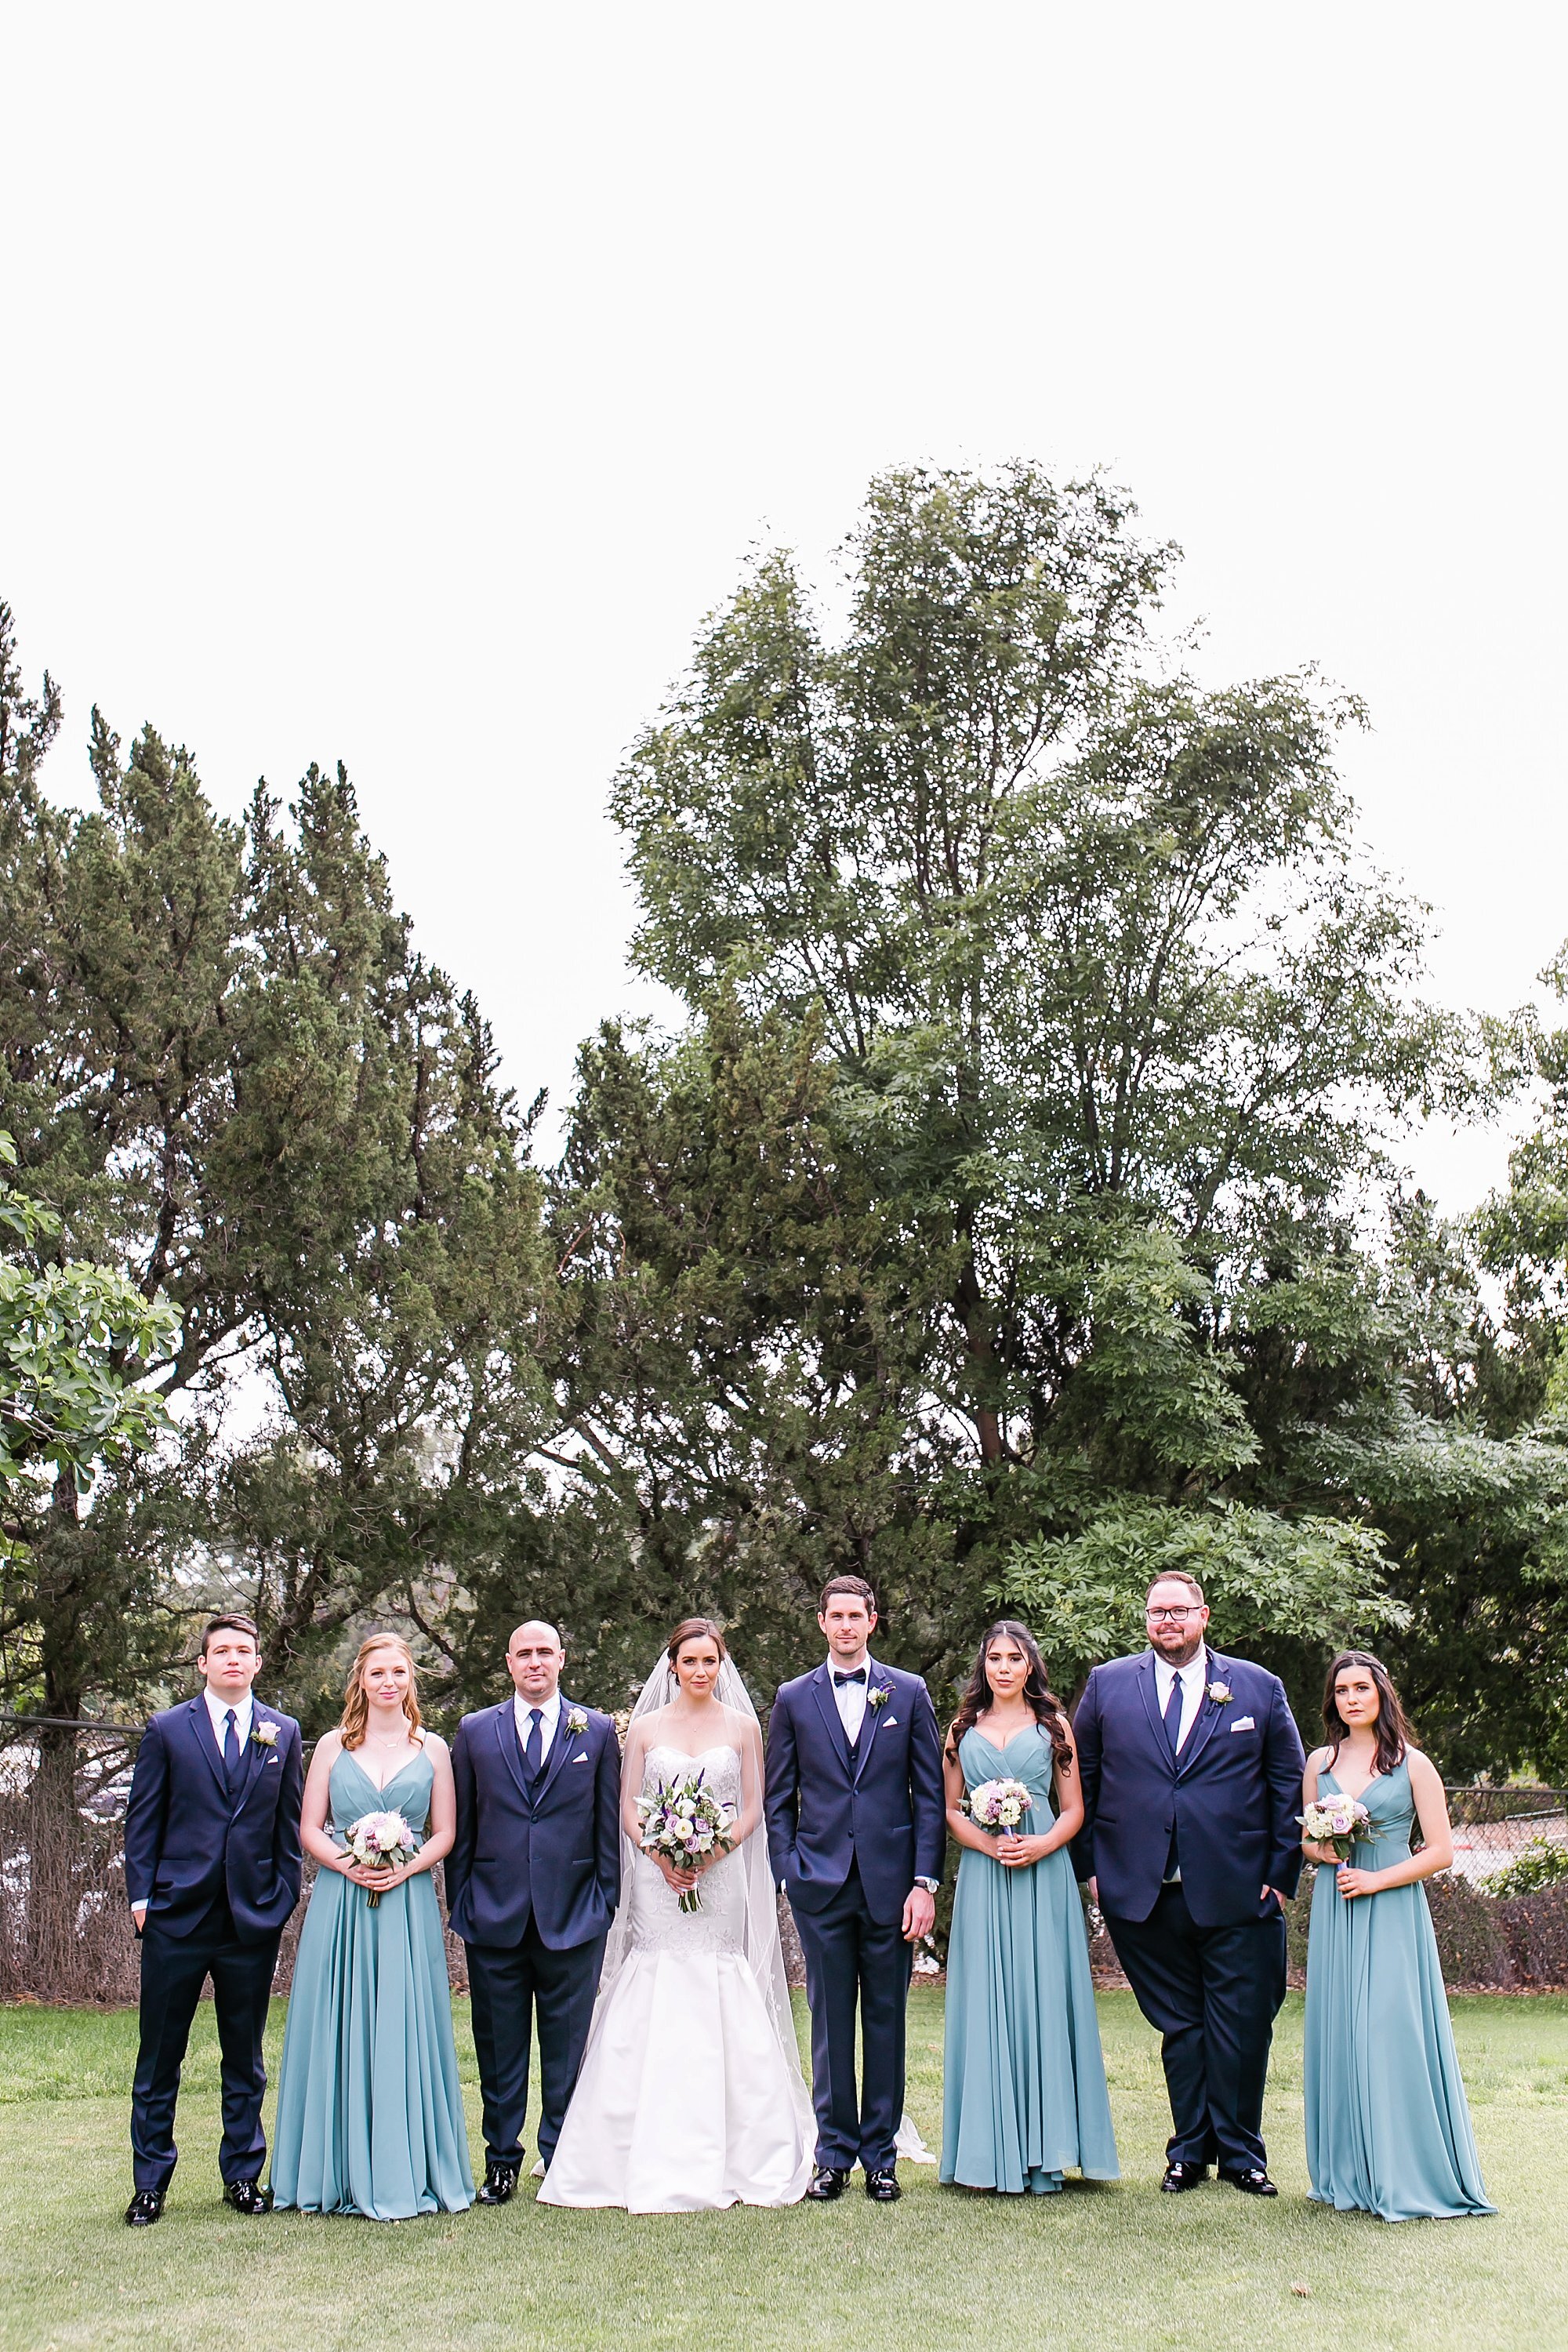  full wedding party in front of trees 